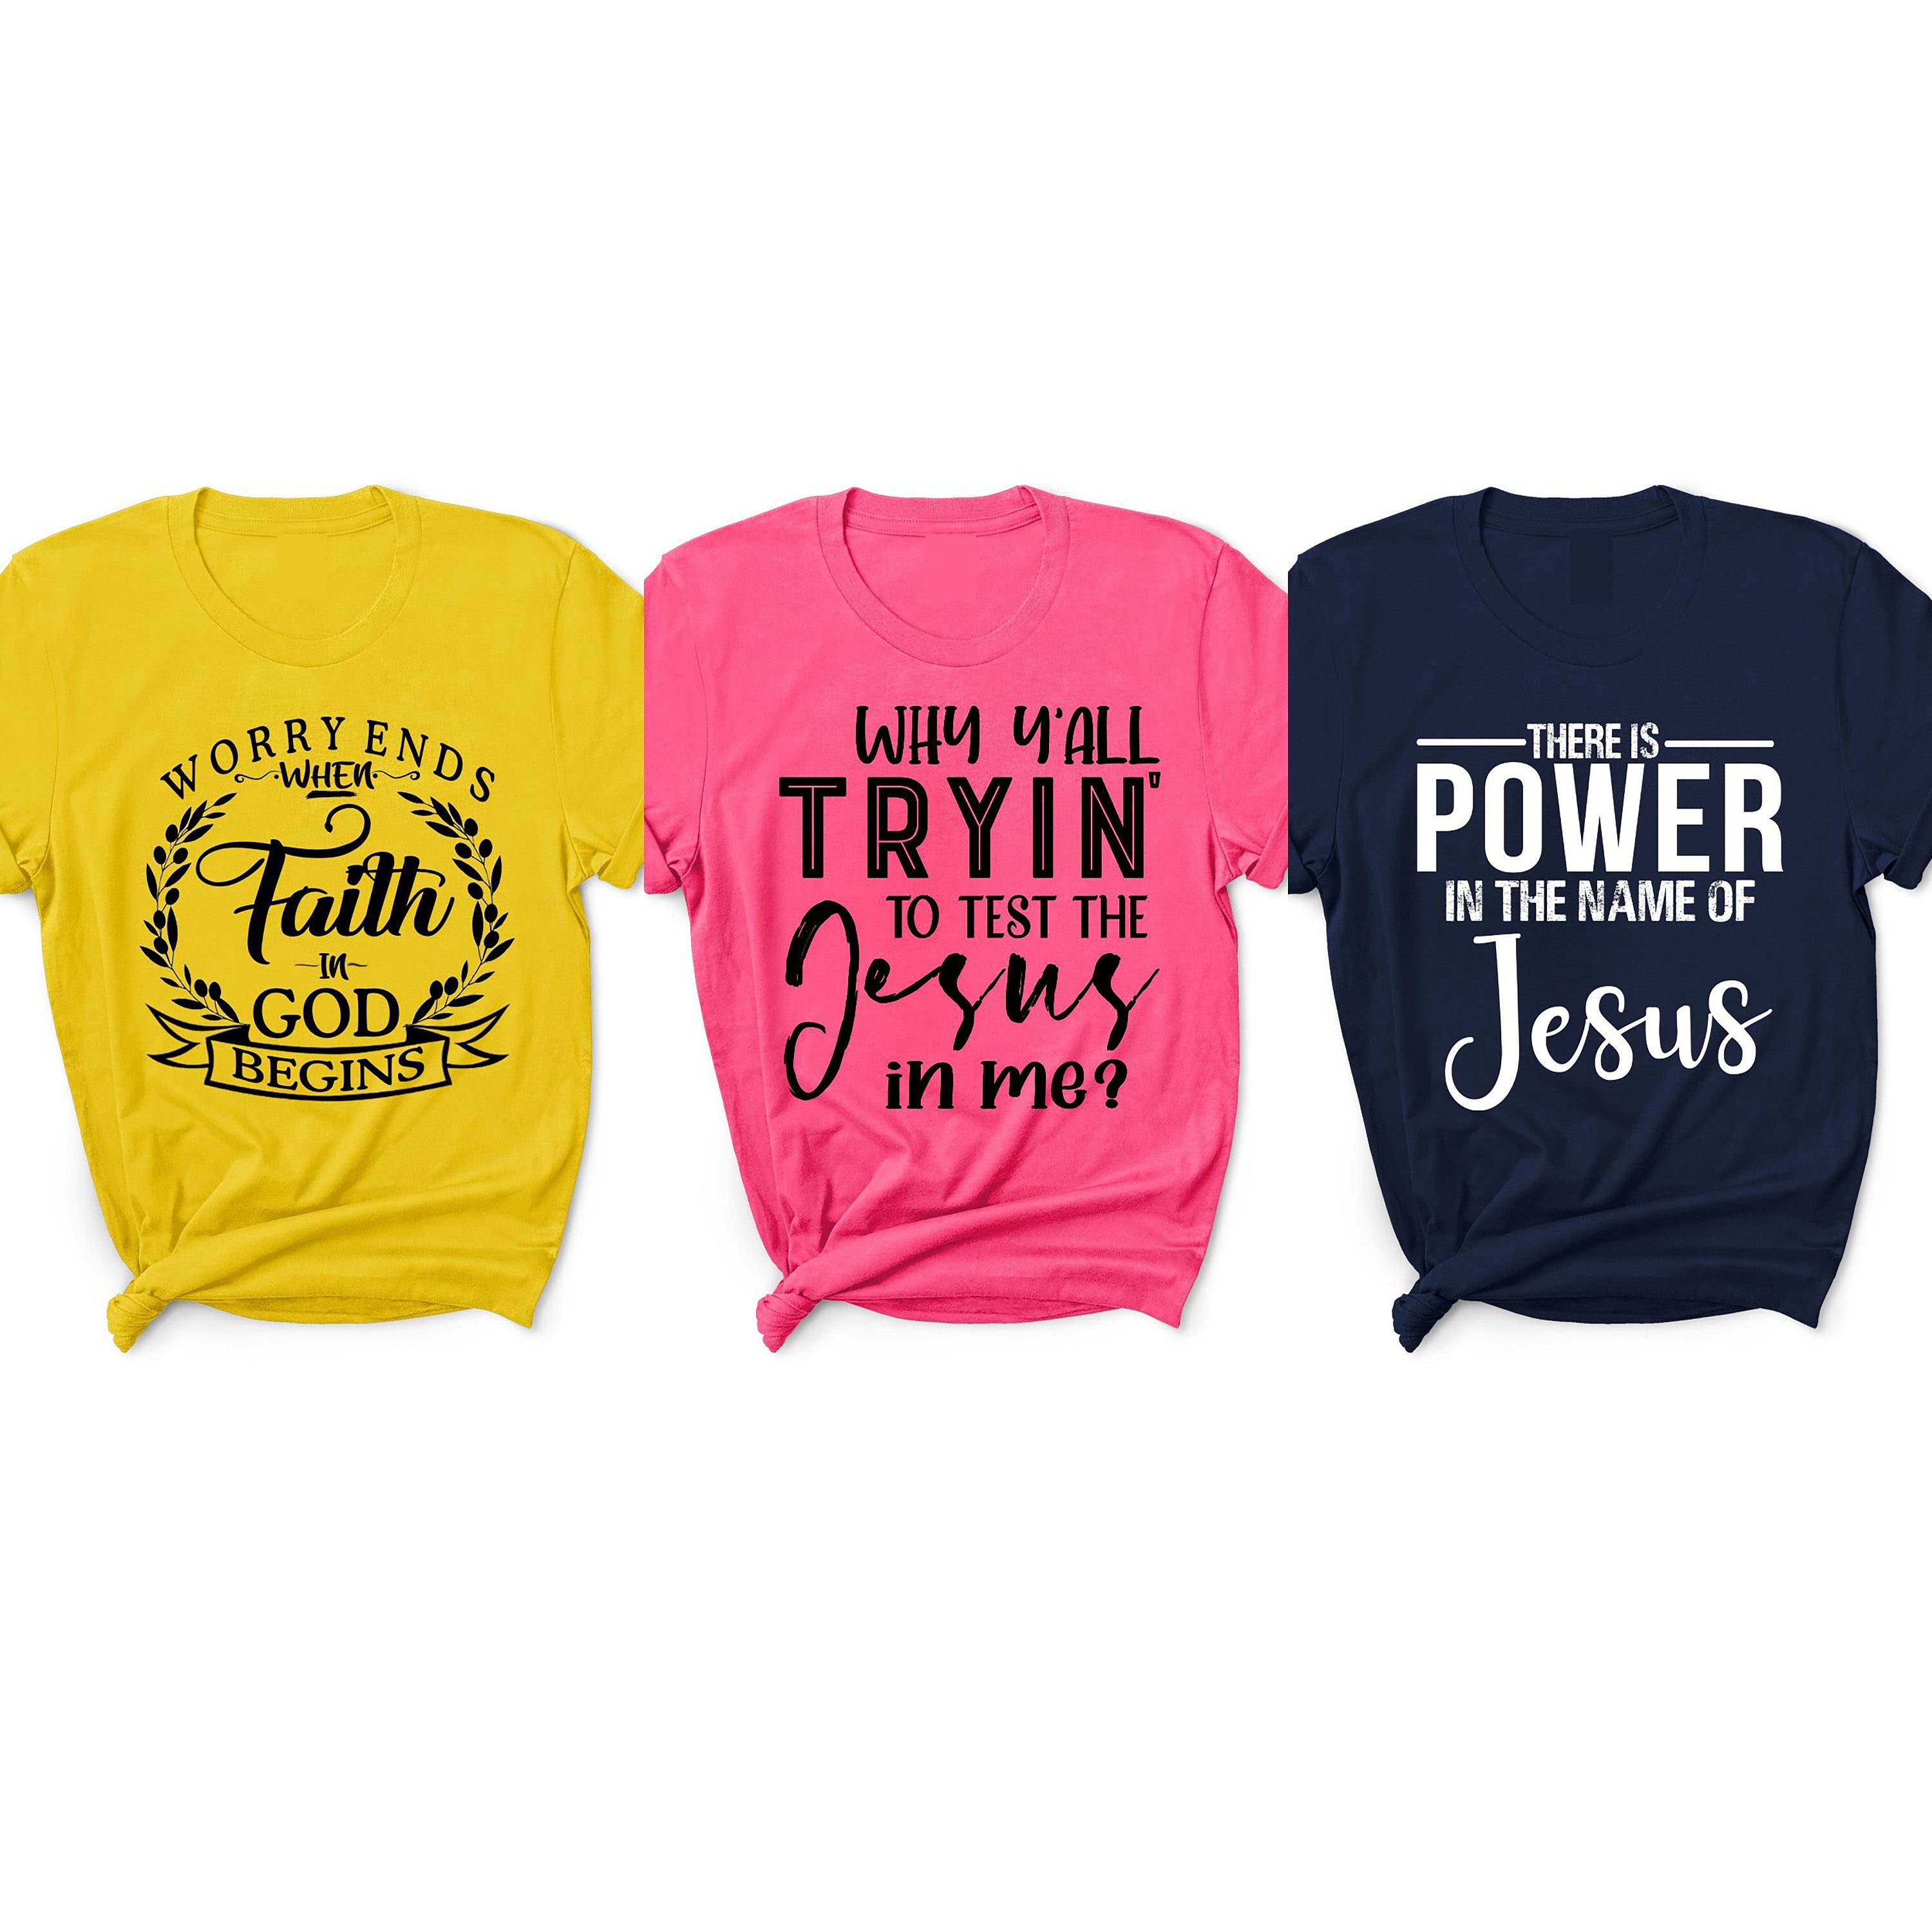 Combo Pack of "Worry Ends+Jesus"- in Latest Designs.